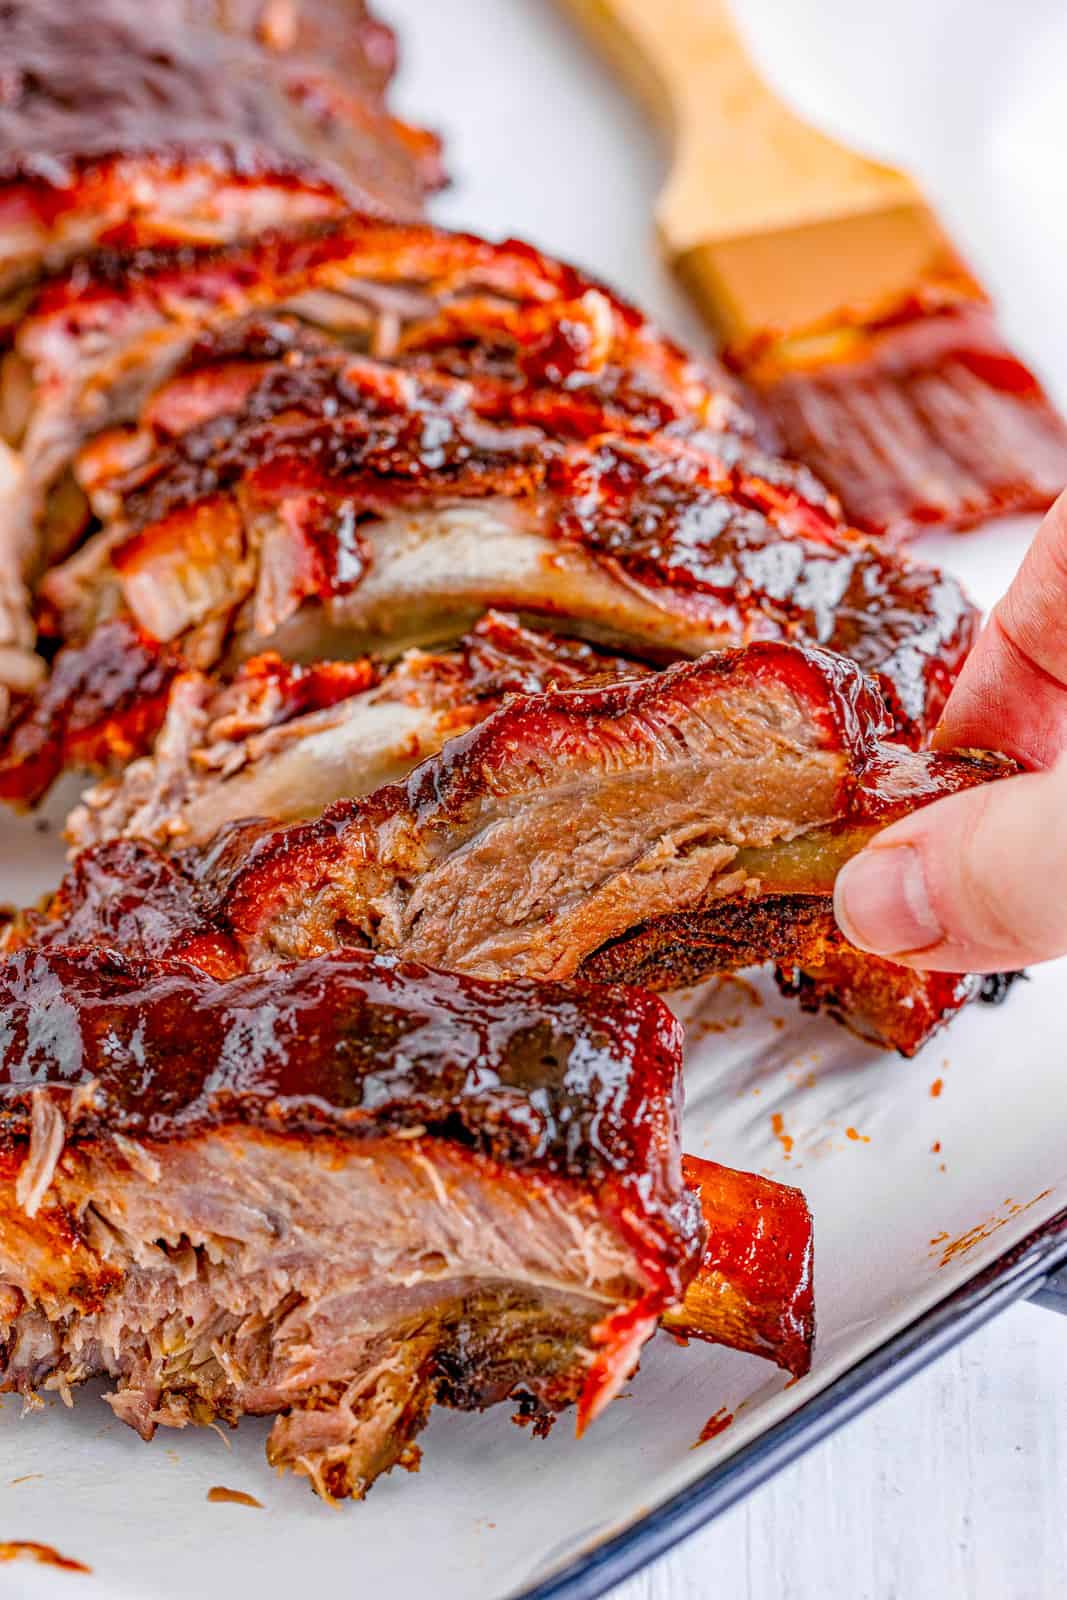 Hand holding up a portion of one Smoke Rib off platter.